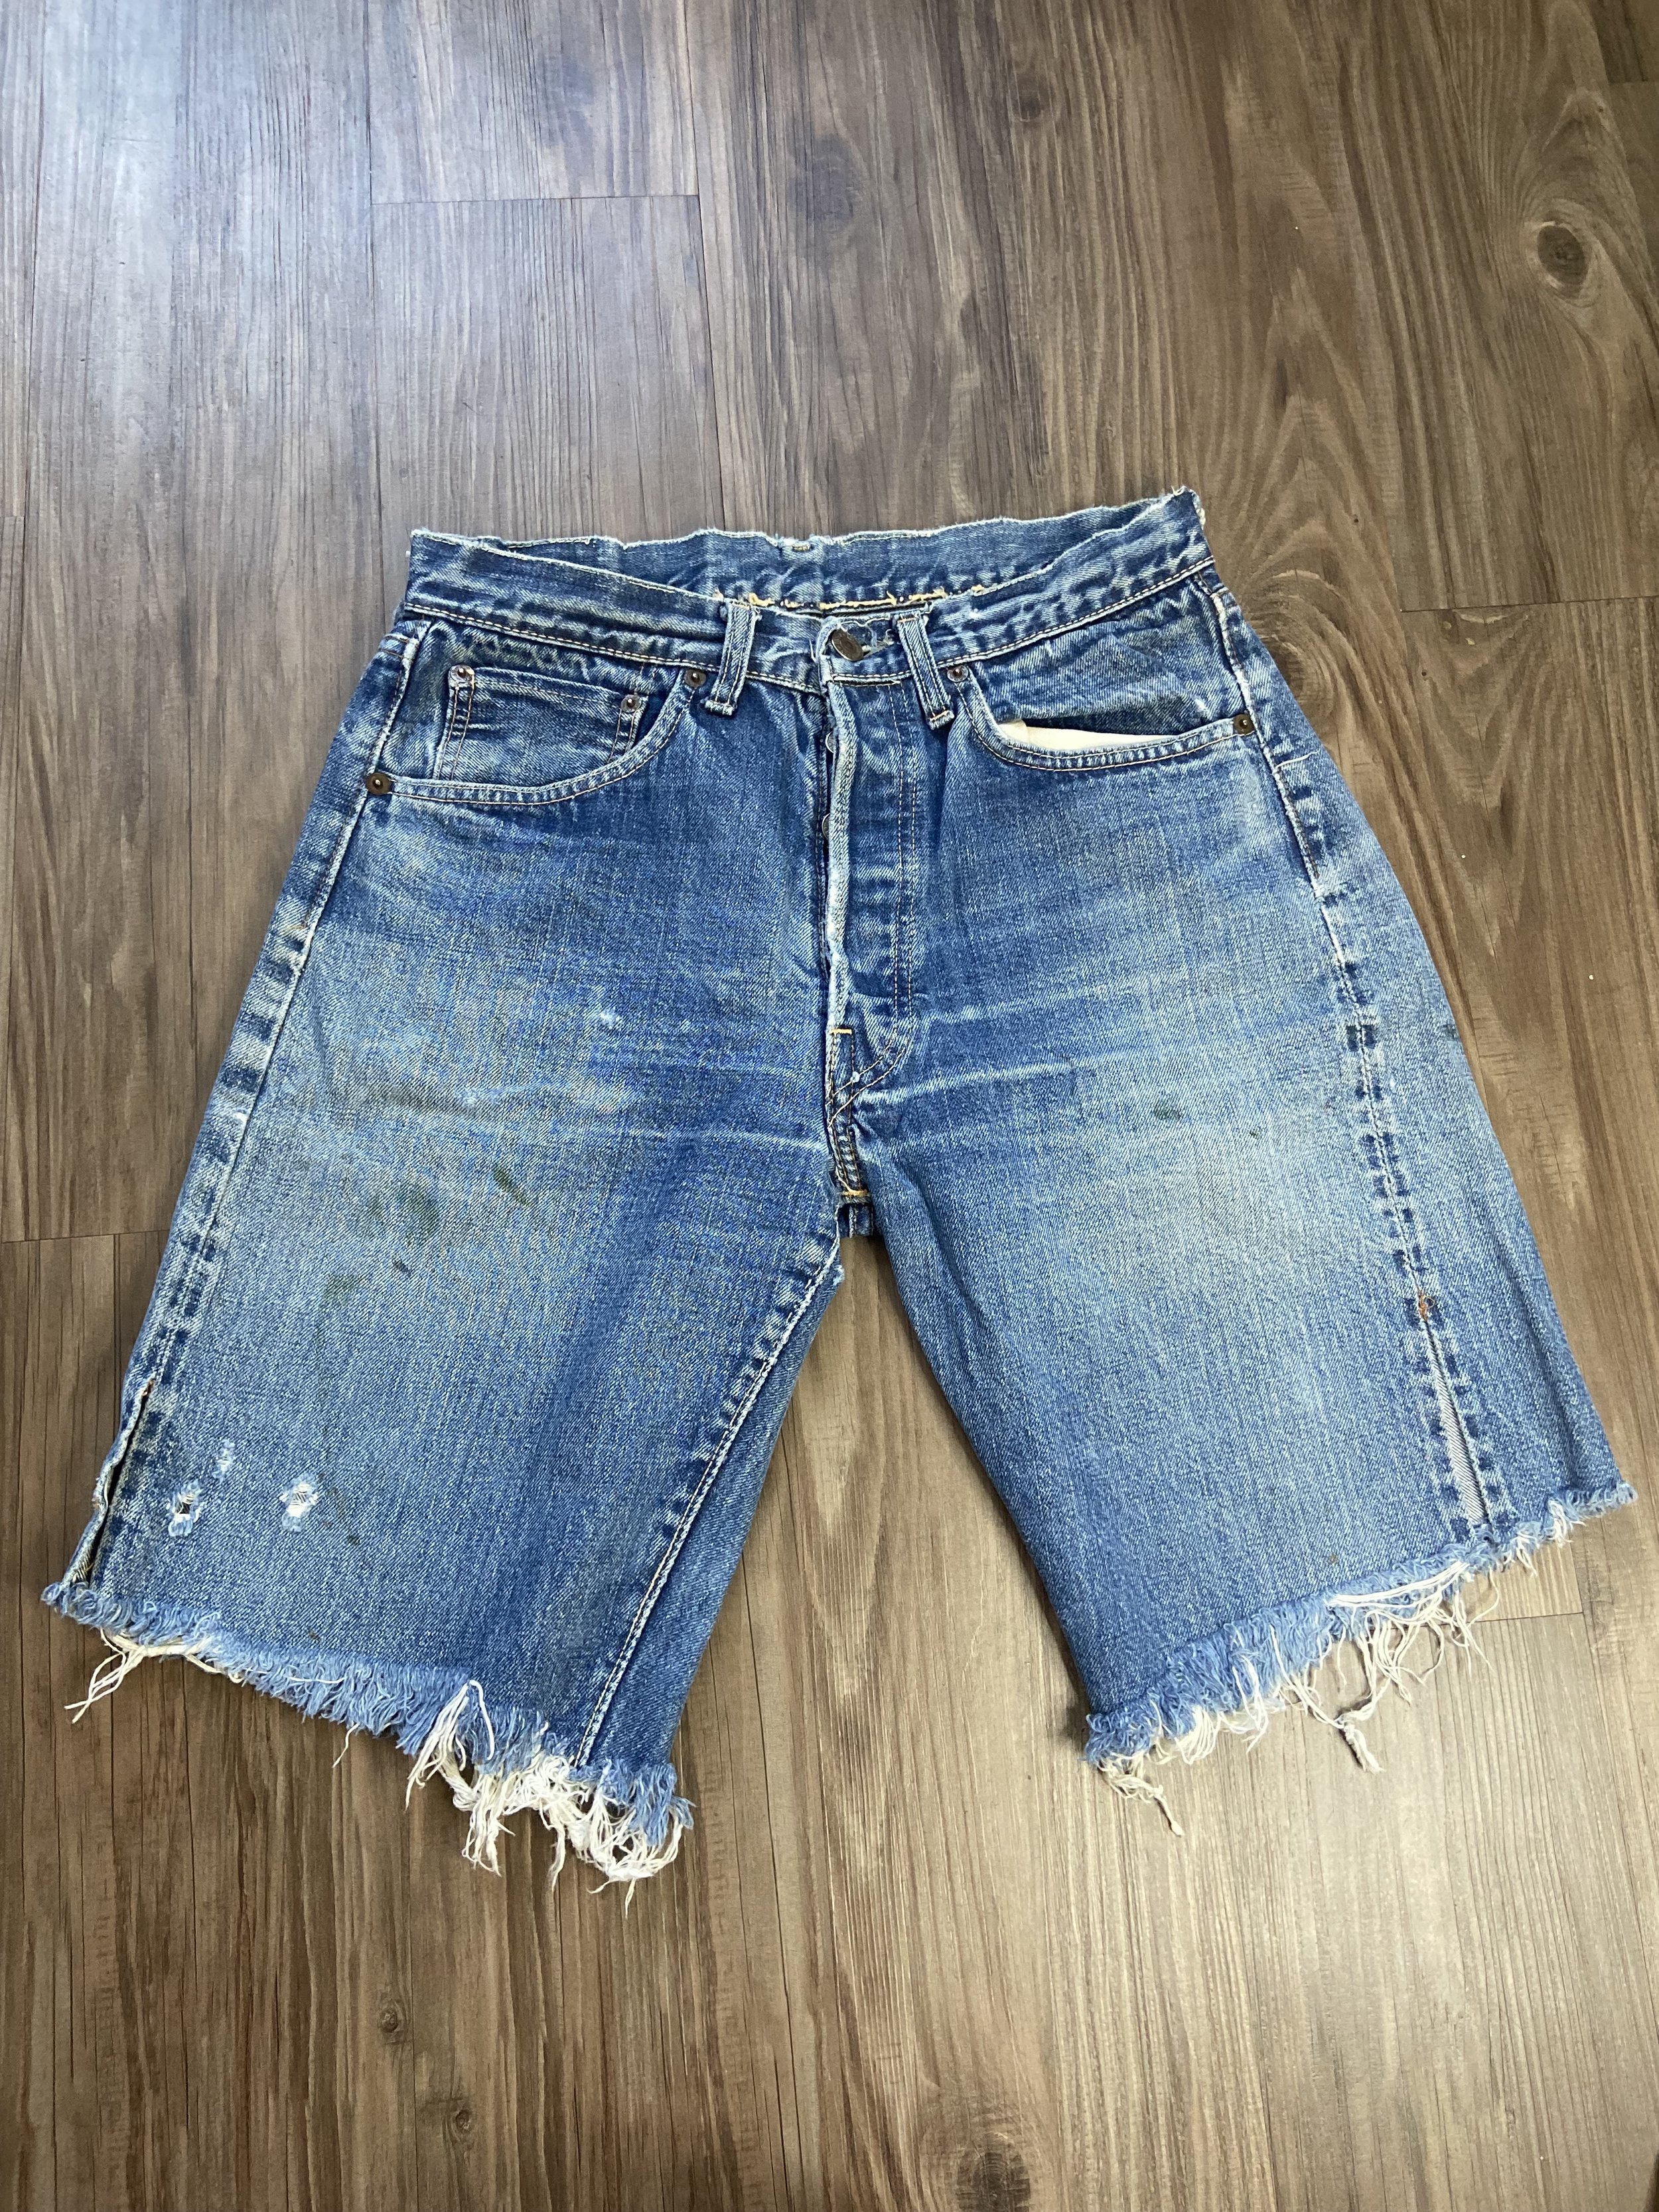 Vintage Levi's 501 BIG E Single Stitch Redlines Naturally Faded and  Distressed Cut Off Denim Blue Jean Shorts — DEAD PEOPLE'S SHIT